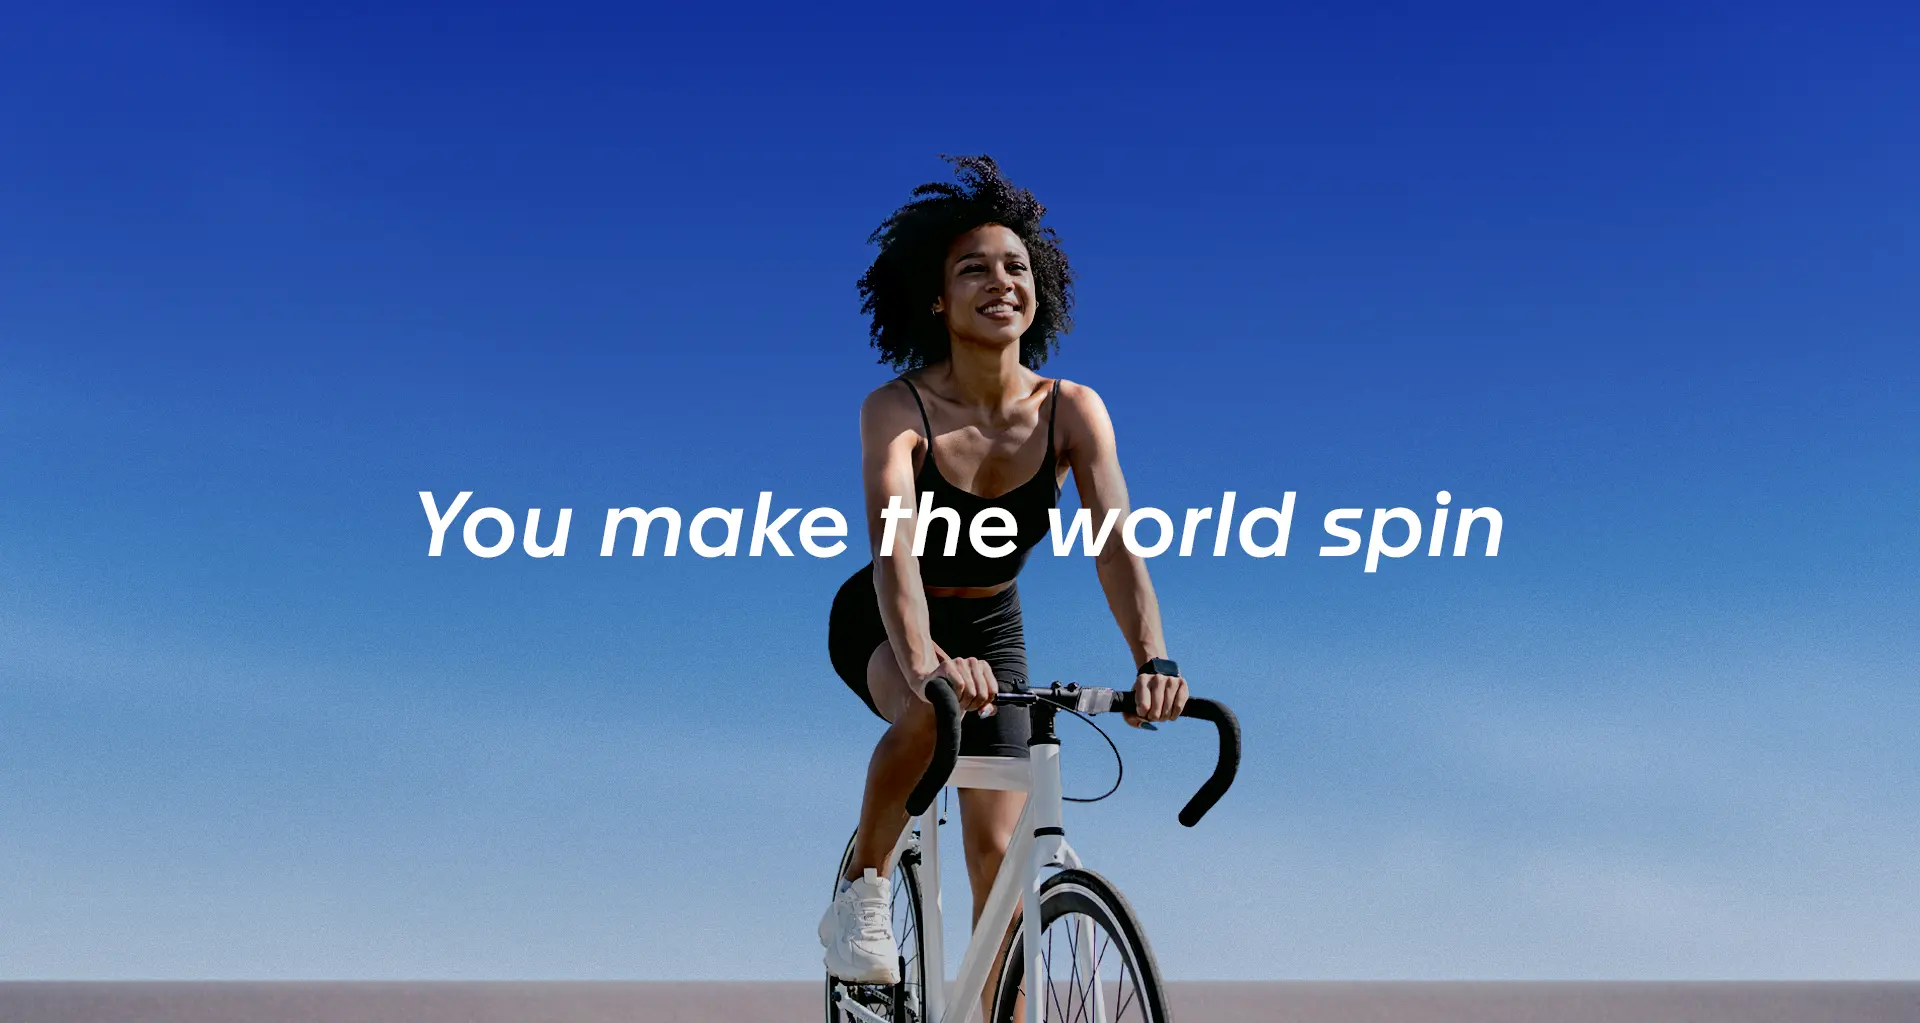 You make the world spin